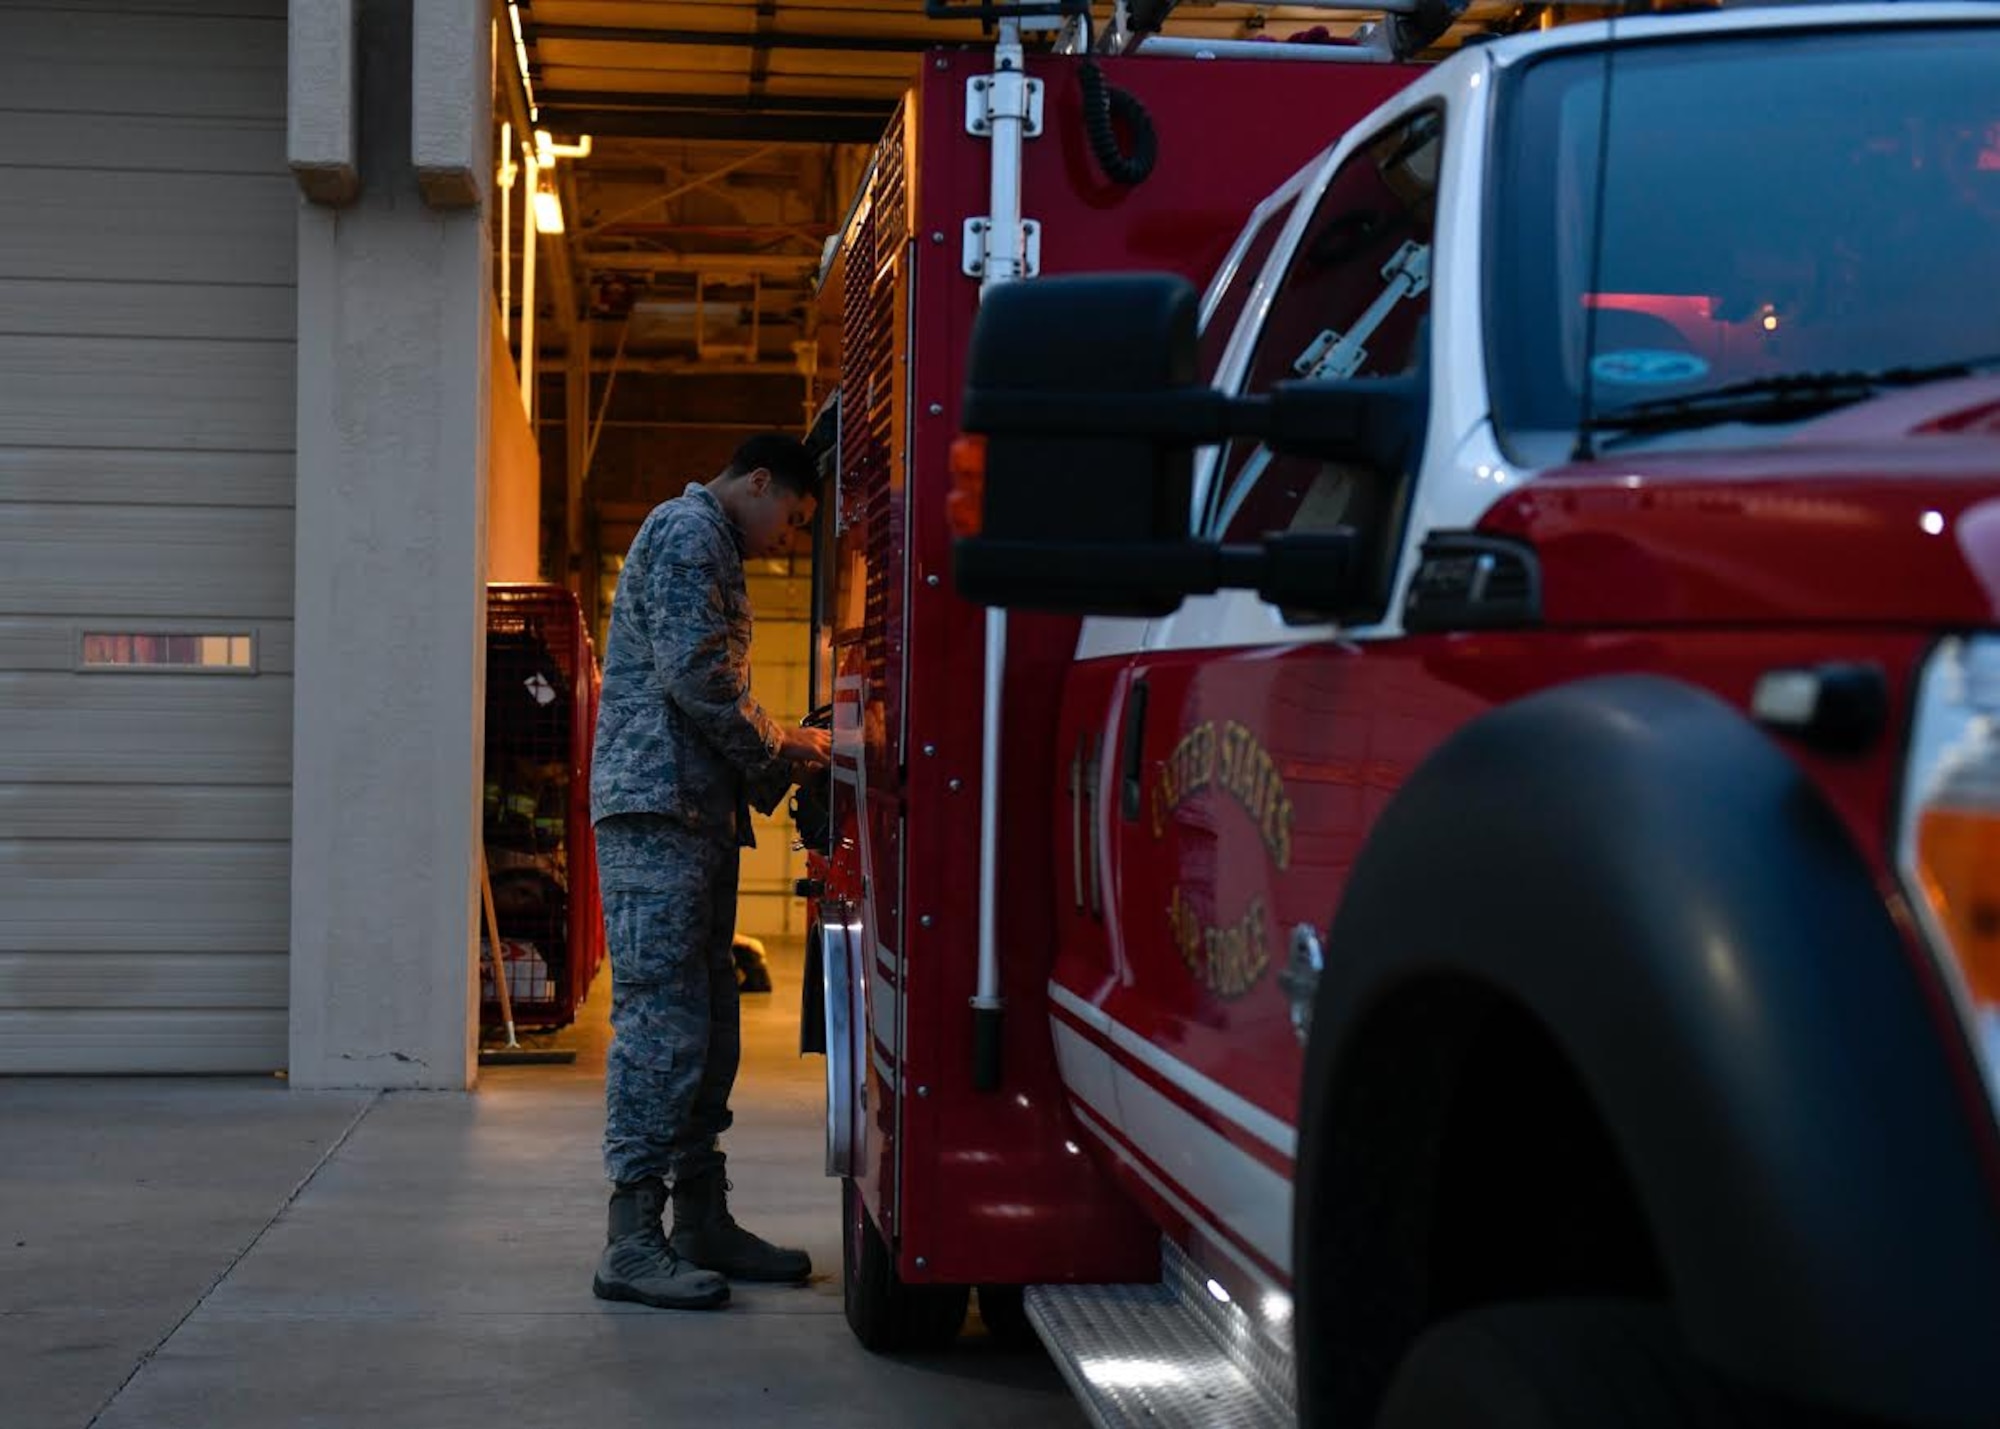 Senior Airman Domitrius Johnson, 56th Civil Engineer Squadron driver operator, inspects a P-34 Rapid Intervention Vehicle (RIV) before beginning his shift Dec. 9, 2019, at the Luke Air Force Base Fire Department at Luke AFB, Ariz.